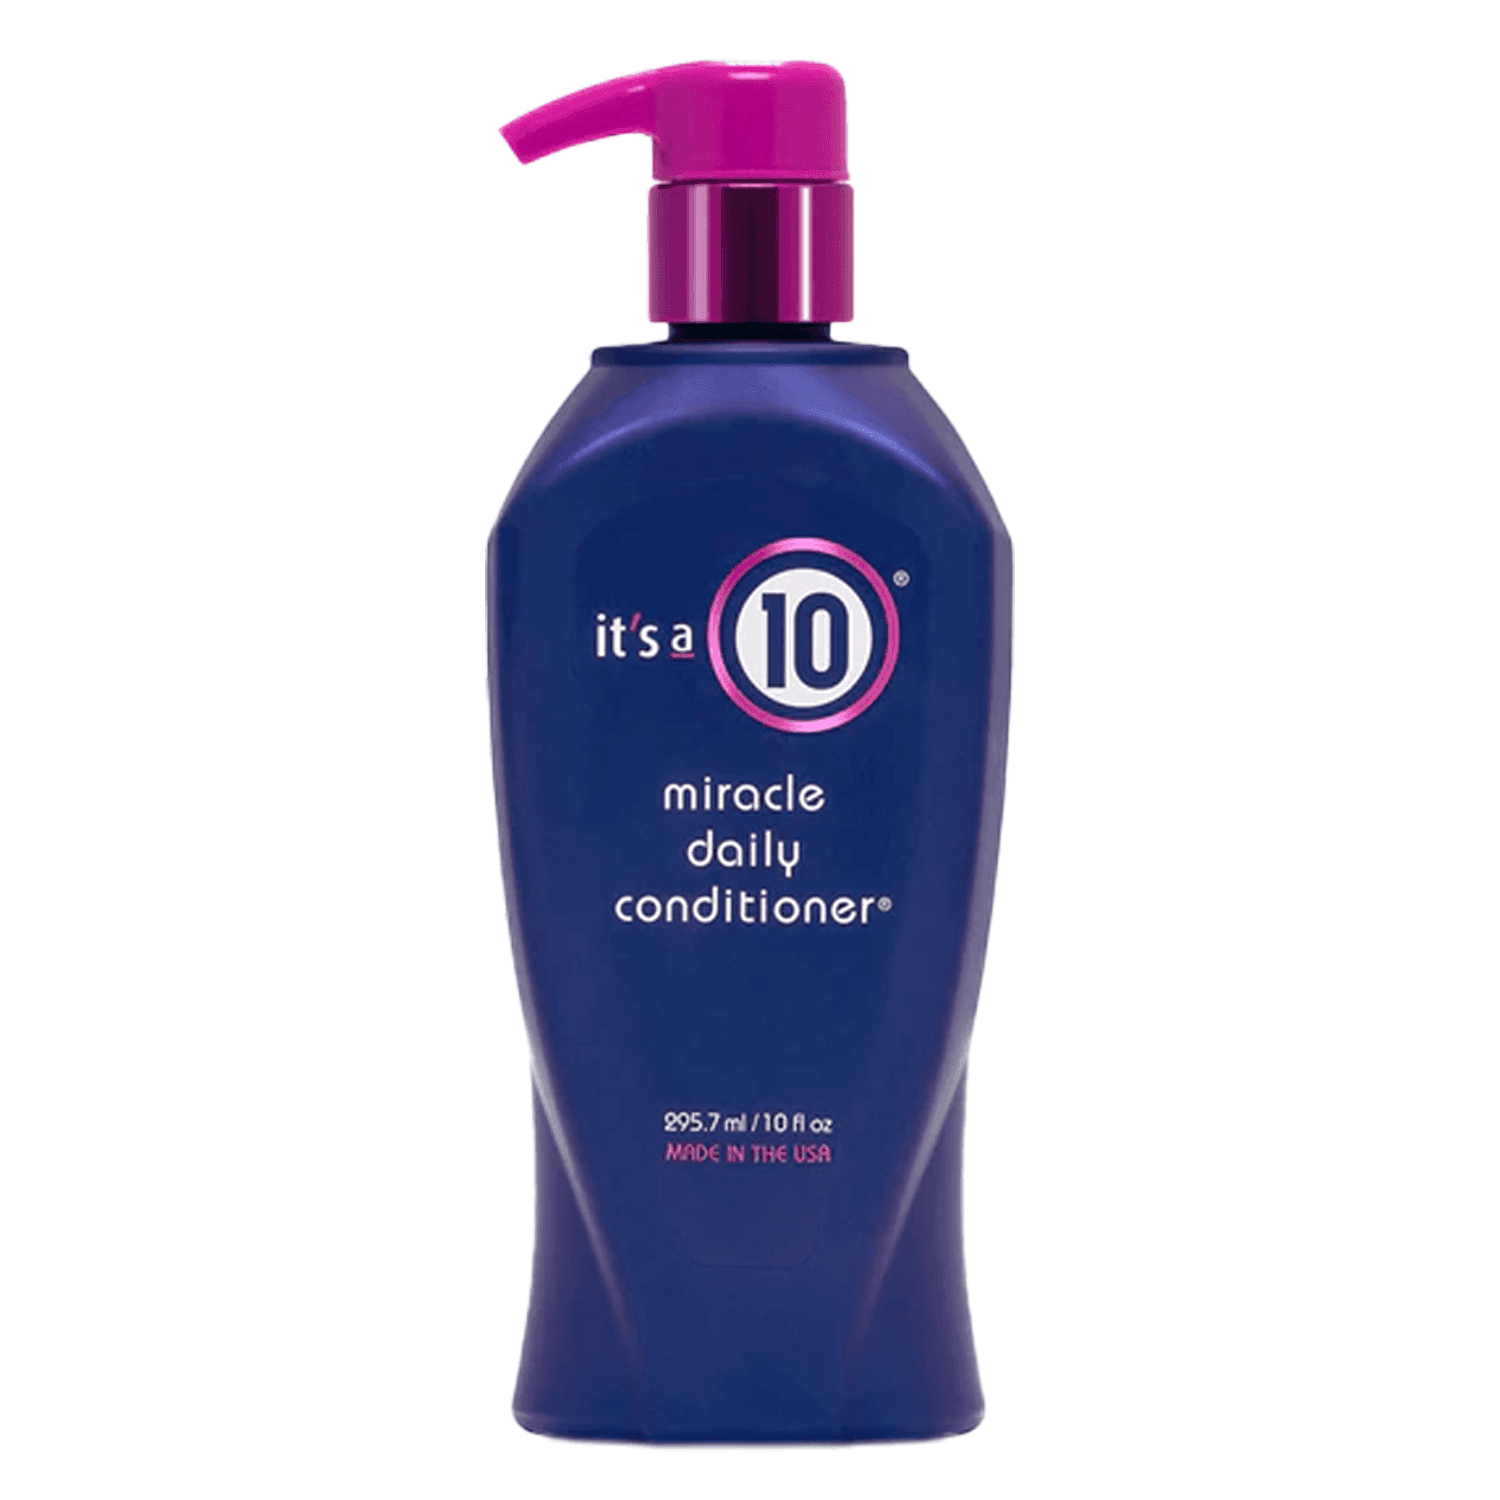 it's a 10 haircare - Miracle Daily Conditioner